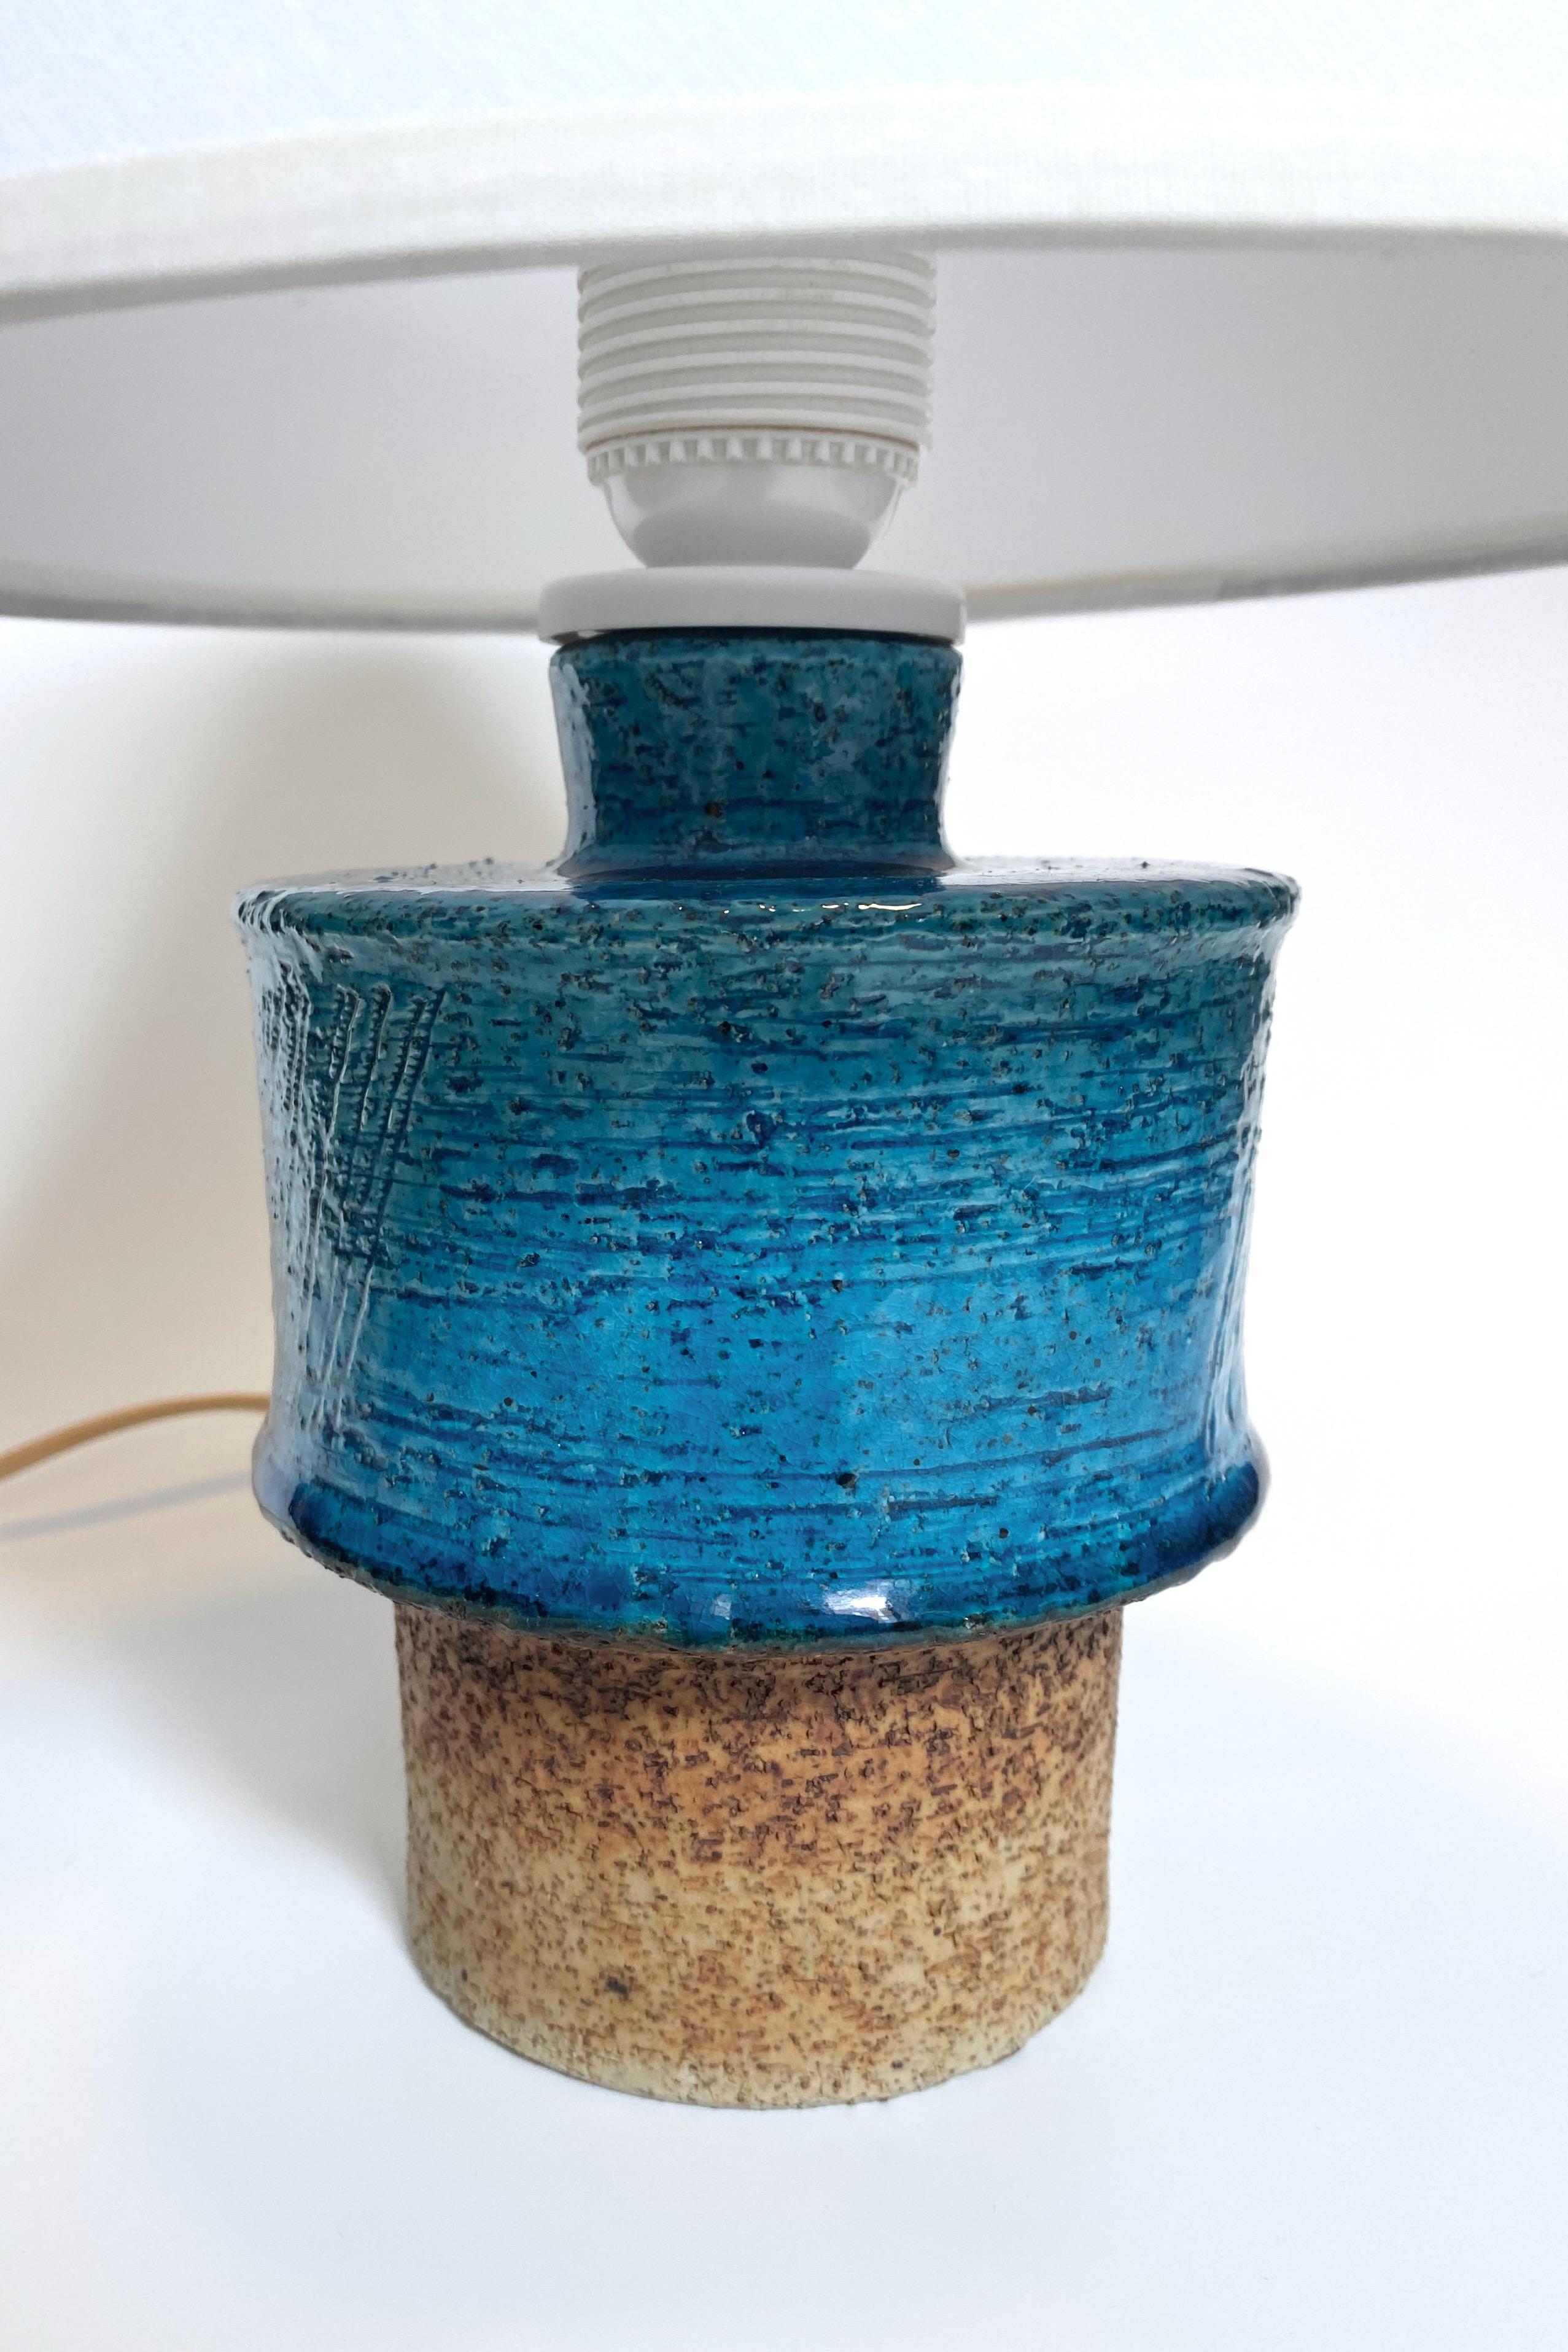 Rustic stoneware table lamp by Swedish ceramic designer Inger Persson. Made by Swedish ceramic factory Rörstrand in the 1970's with the designers signature underneath. Beautiful turquoise and stone colors and in a very good condition. Includes new